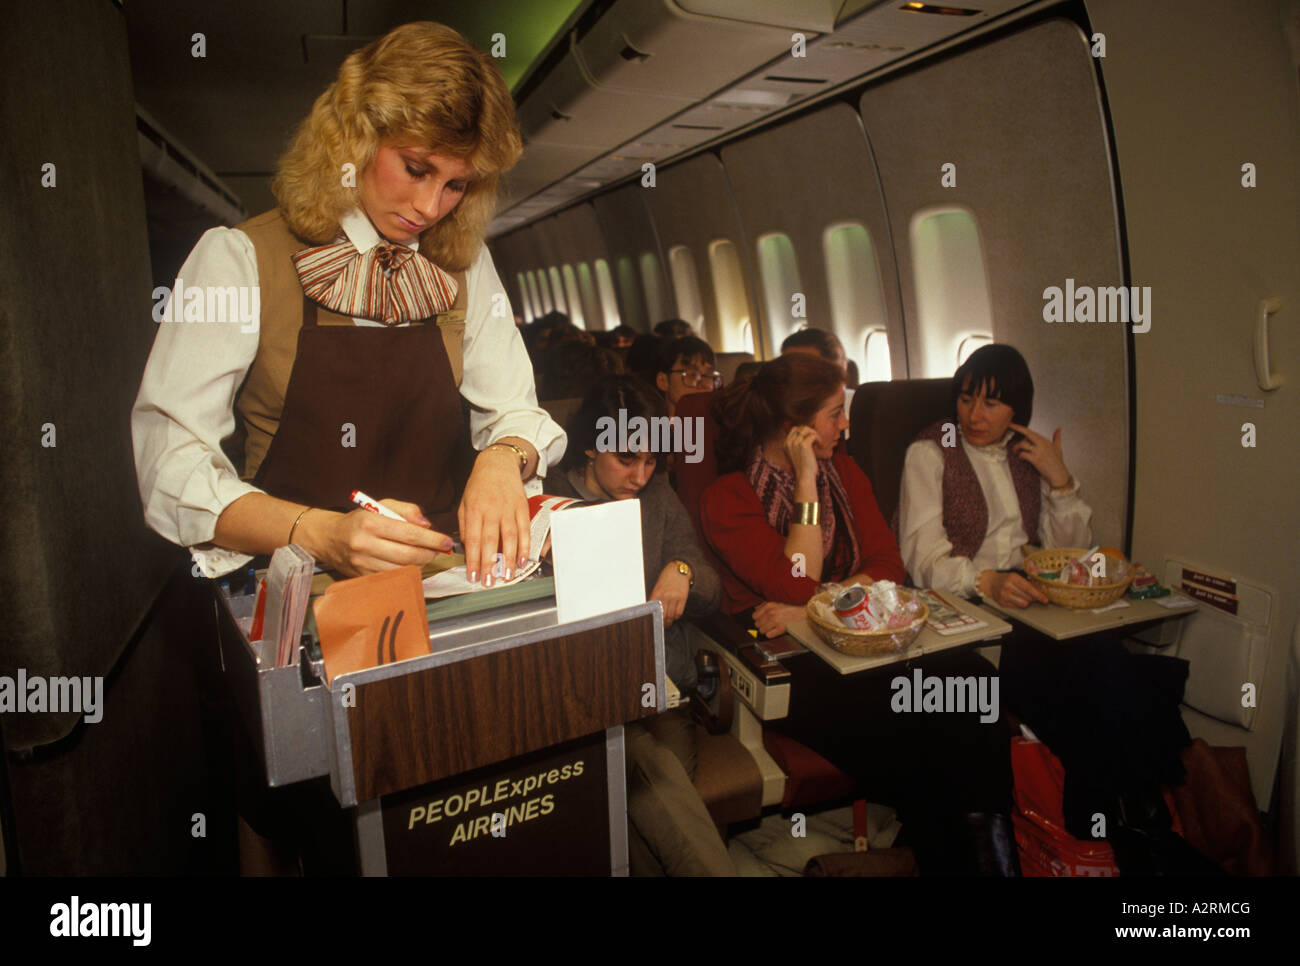 People Express PeopleExpress May 26th 1983 first flight from Gatwick  airport London to Newark New Jersey USA , going on vacation. HOMER SYKES  Stock Photo - Alamy